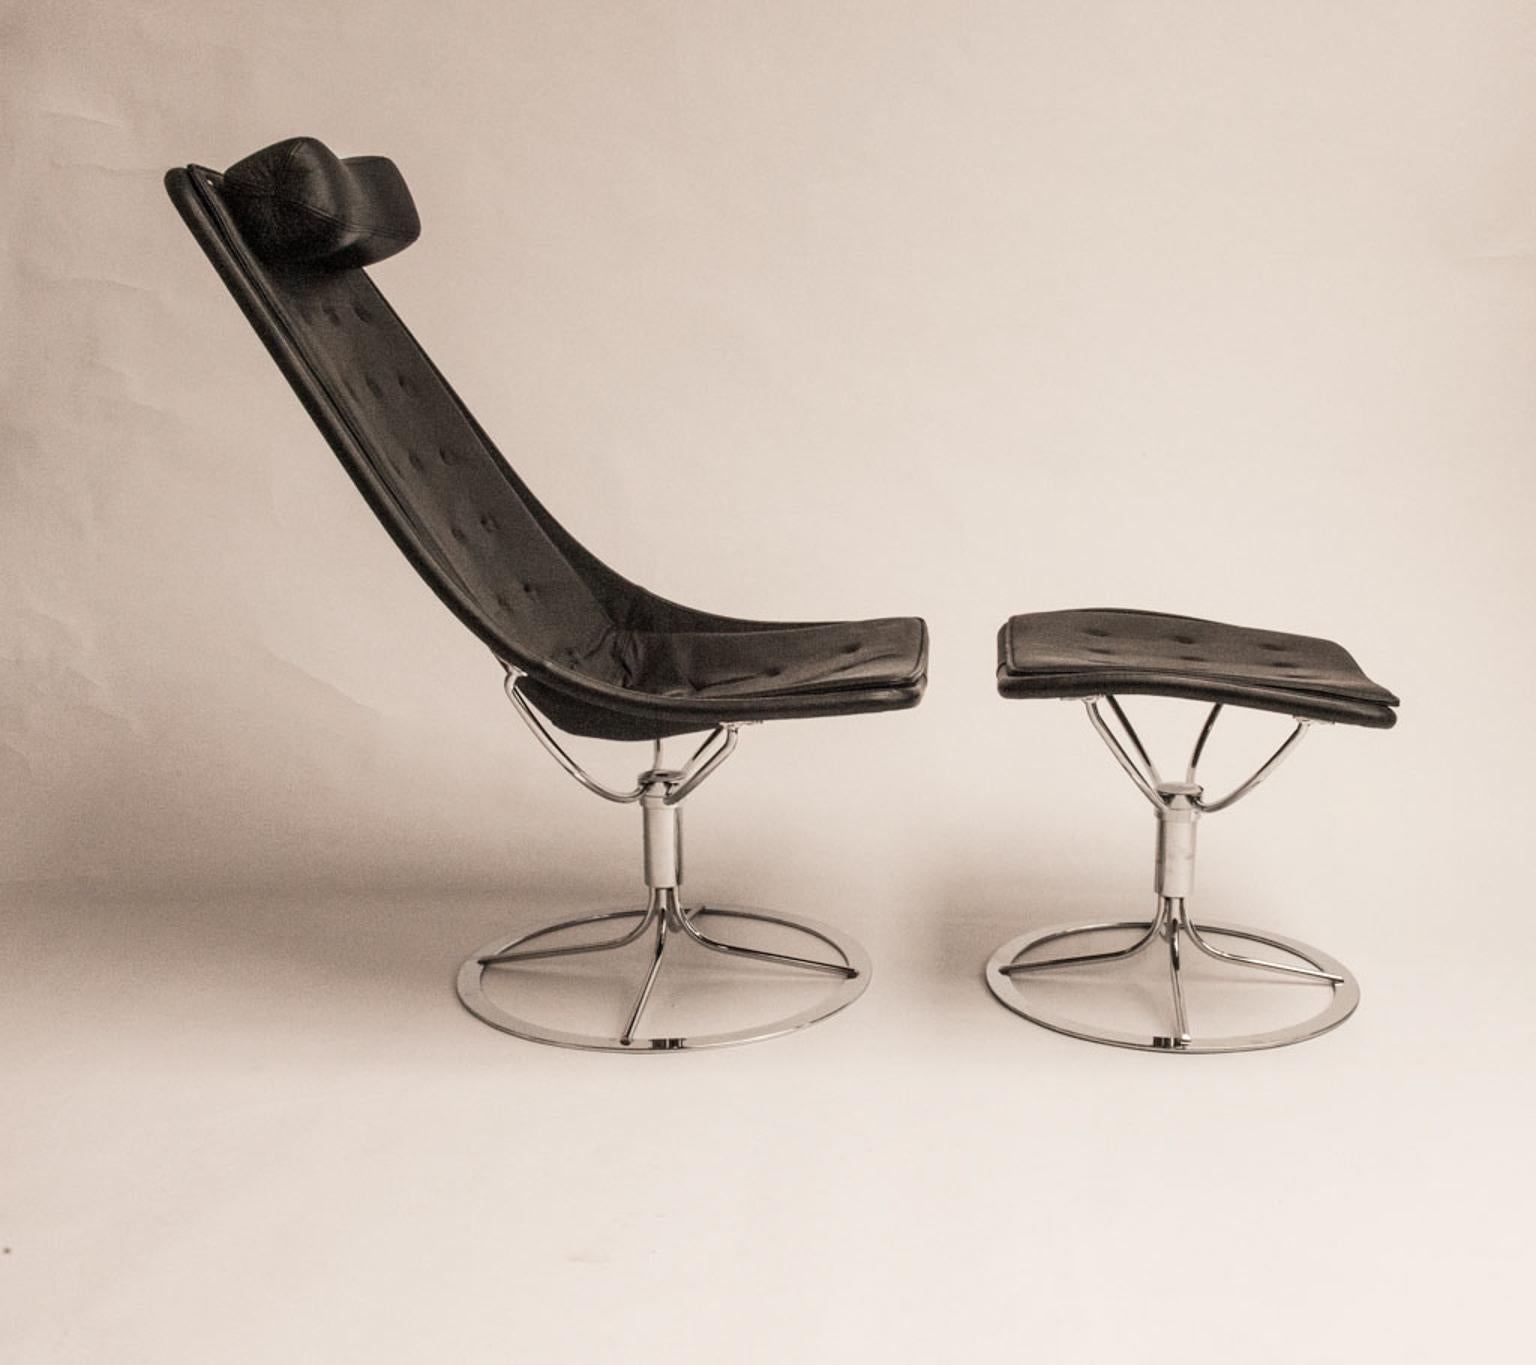 The Jetson lounge chair and stool by is very comfortable. It comes with Black Leather upholstery and Chromed steel base with swivel function and return mechanism. Neck cushion. Produced by Dux Sweden.

The Jetson armchair is a true classic in the